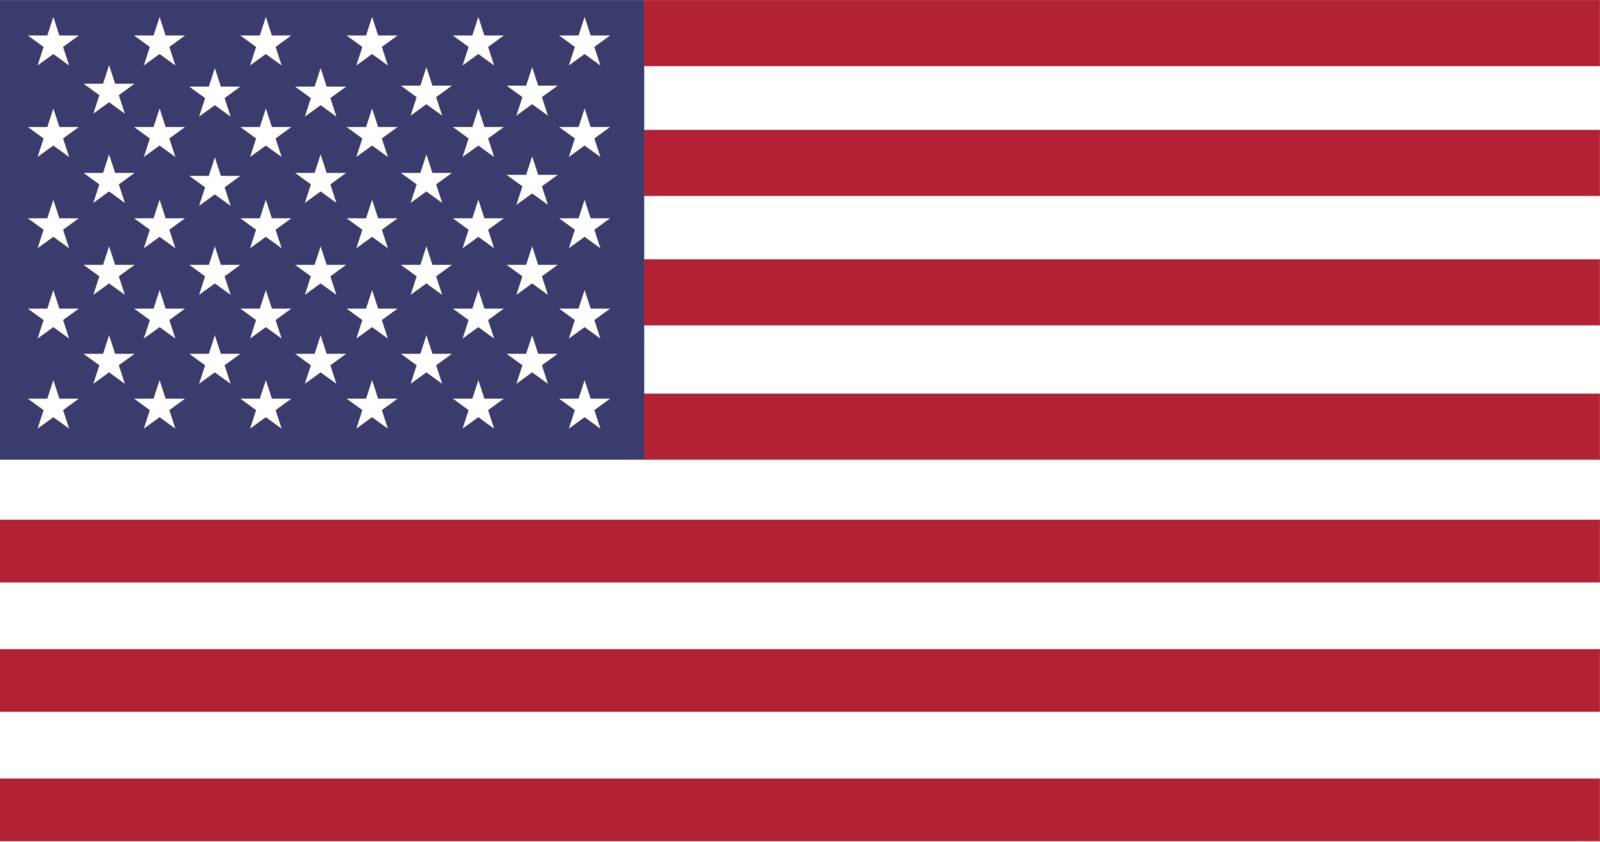 Stars and Stripes - The American Flag